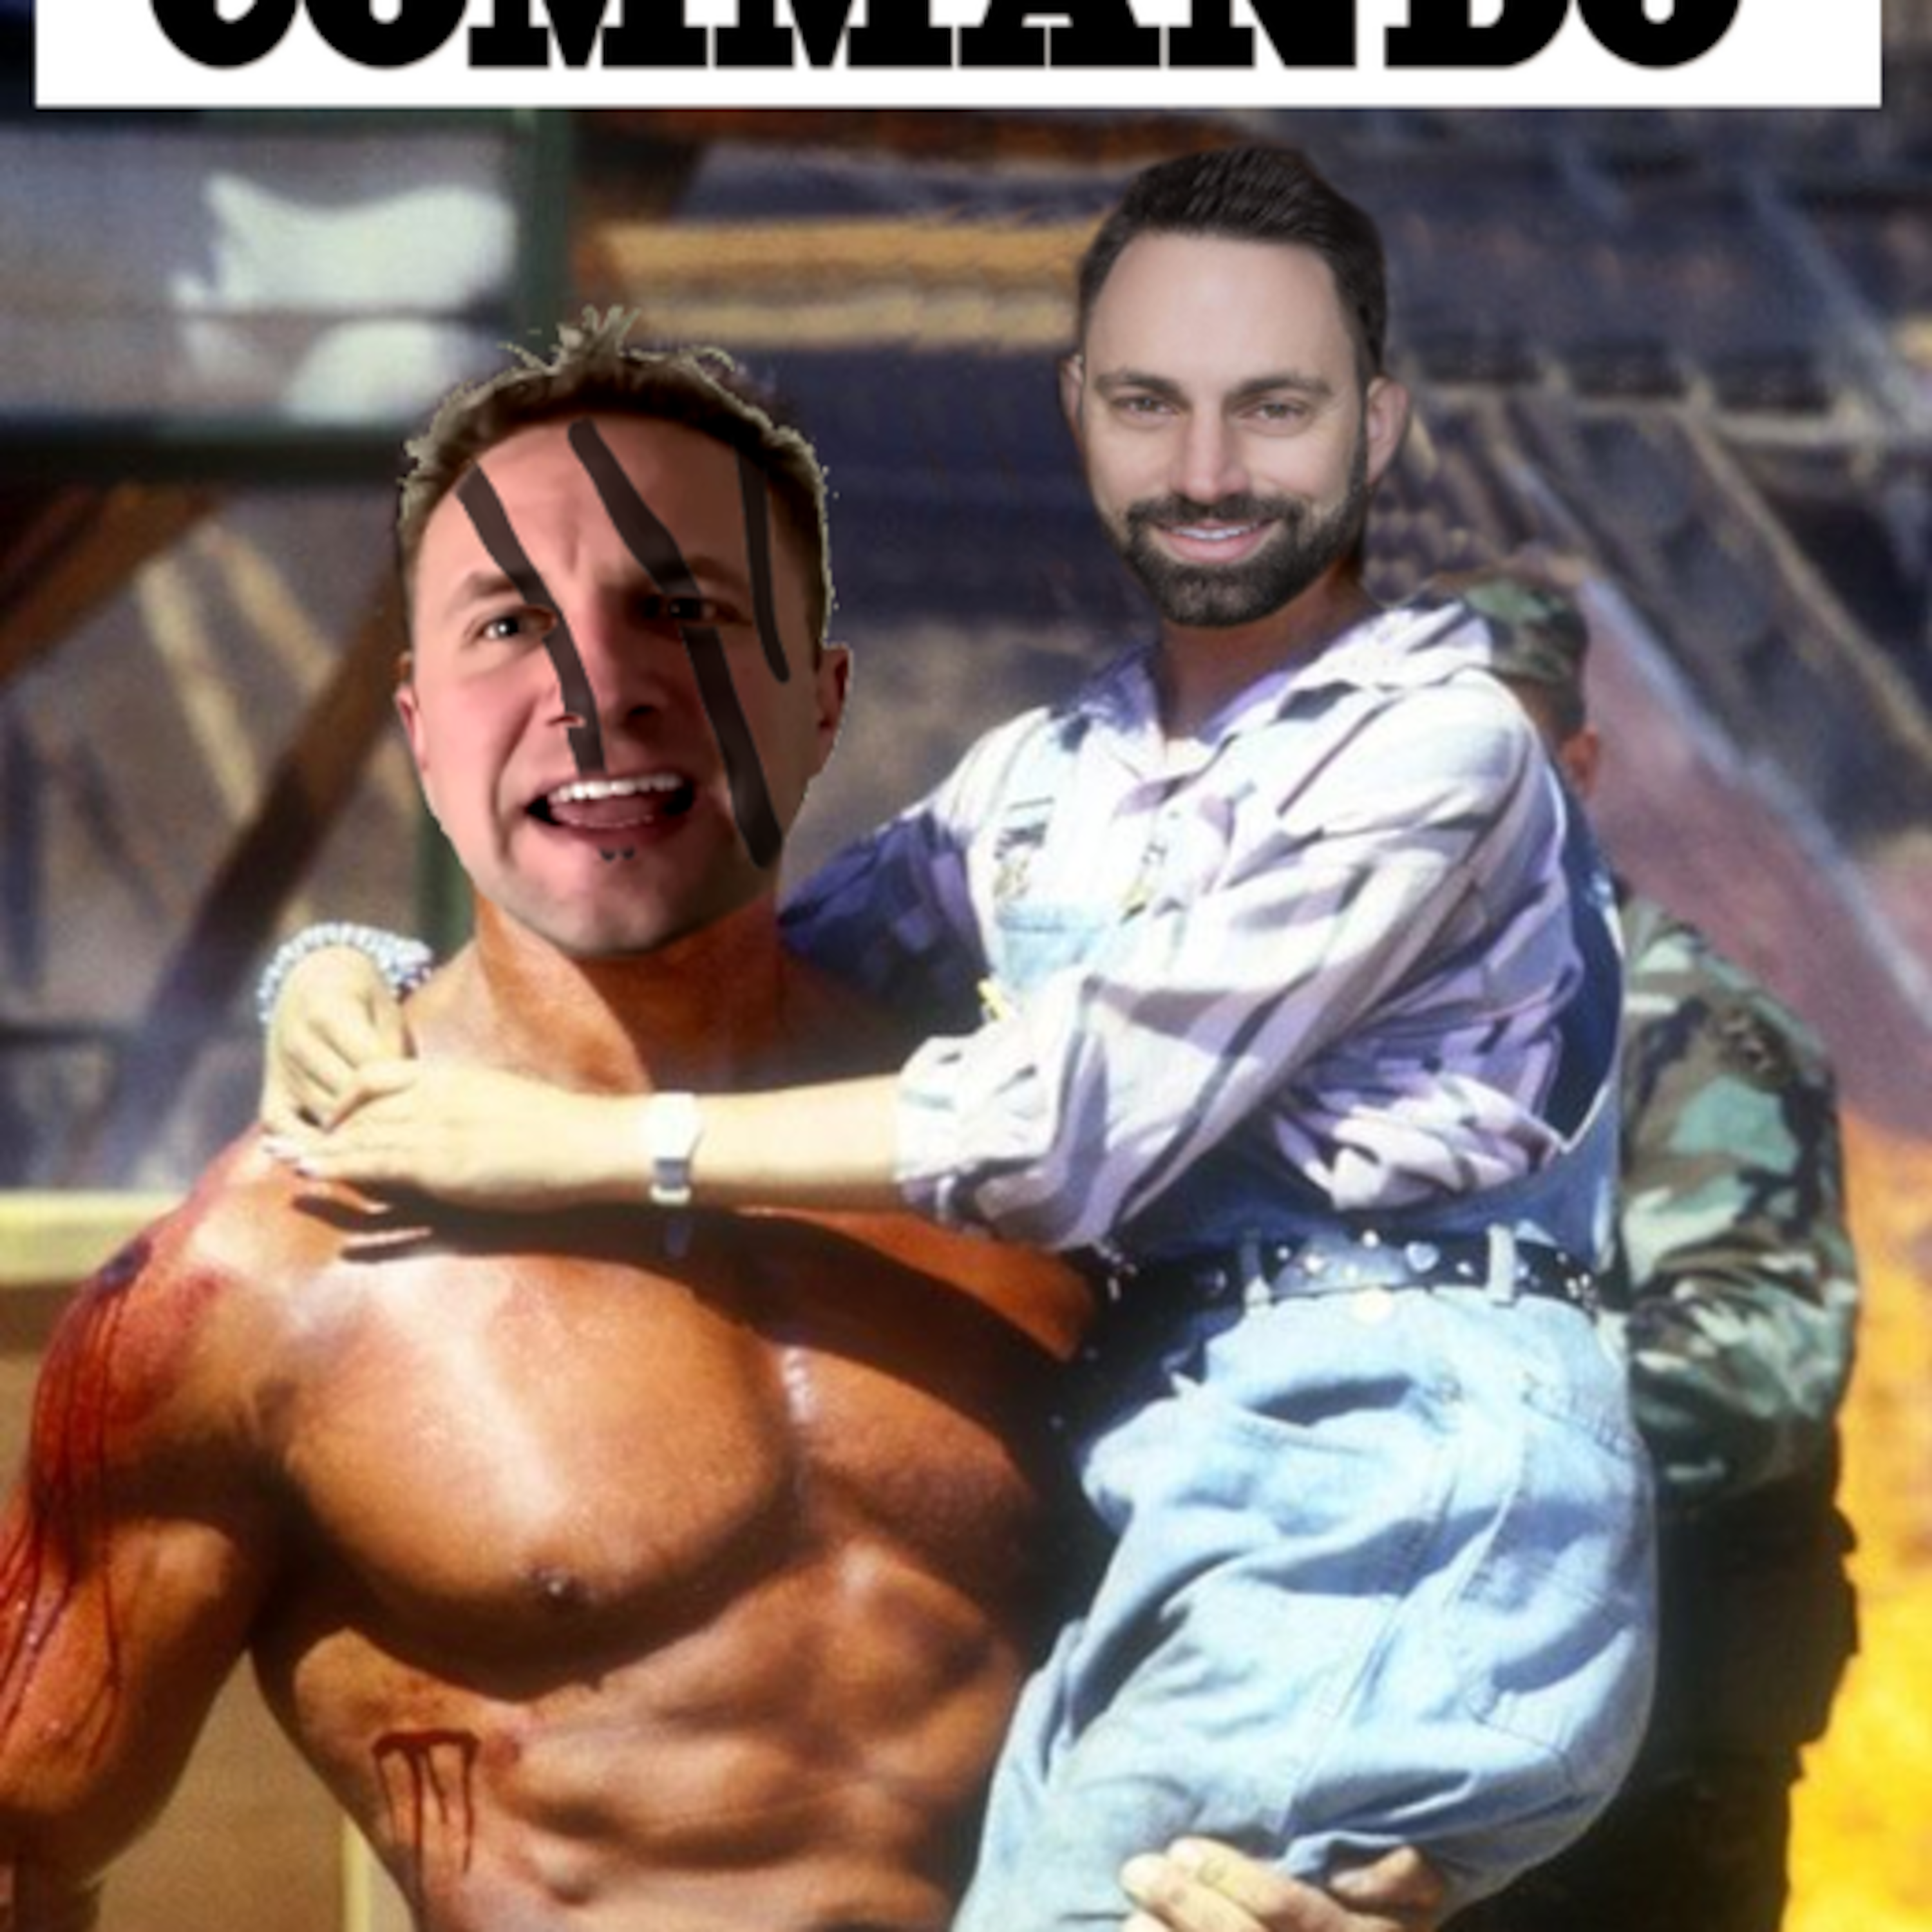 Episode 103: George Neumann THROWS A STEAM PIPE into Commando Episode 103 GTSC podcast